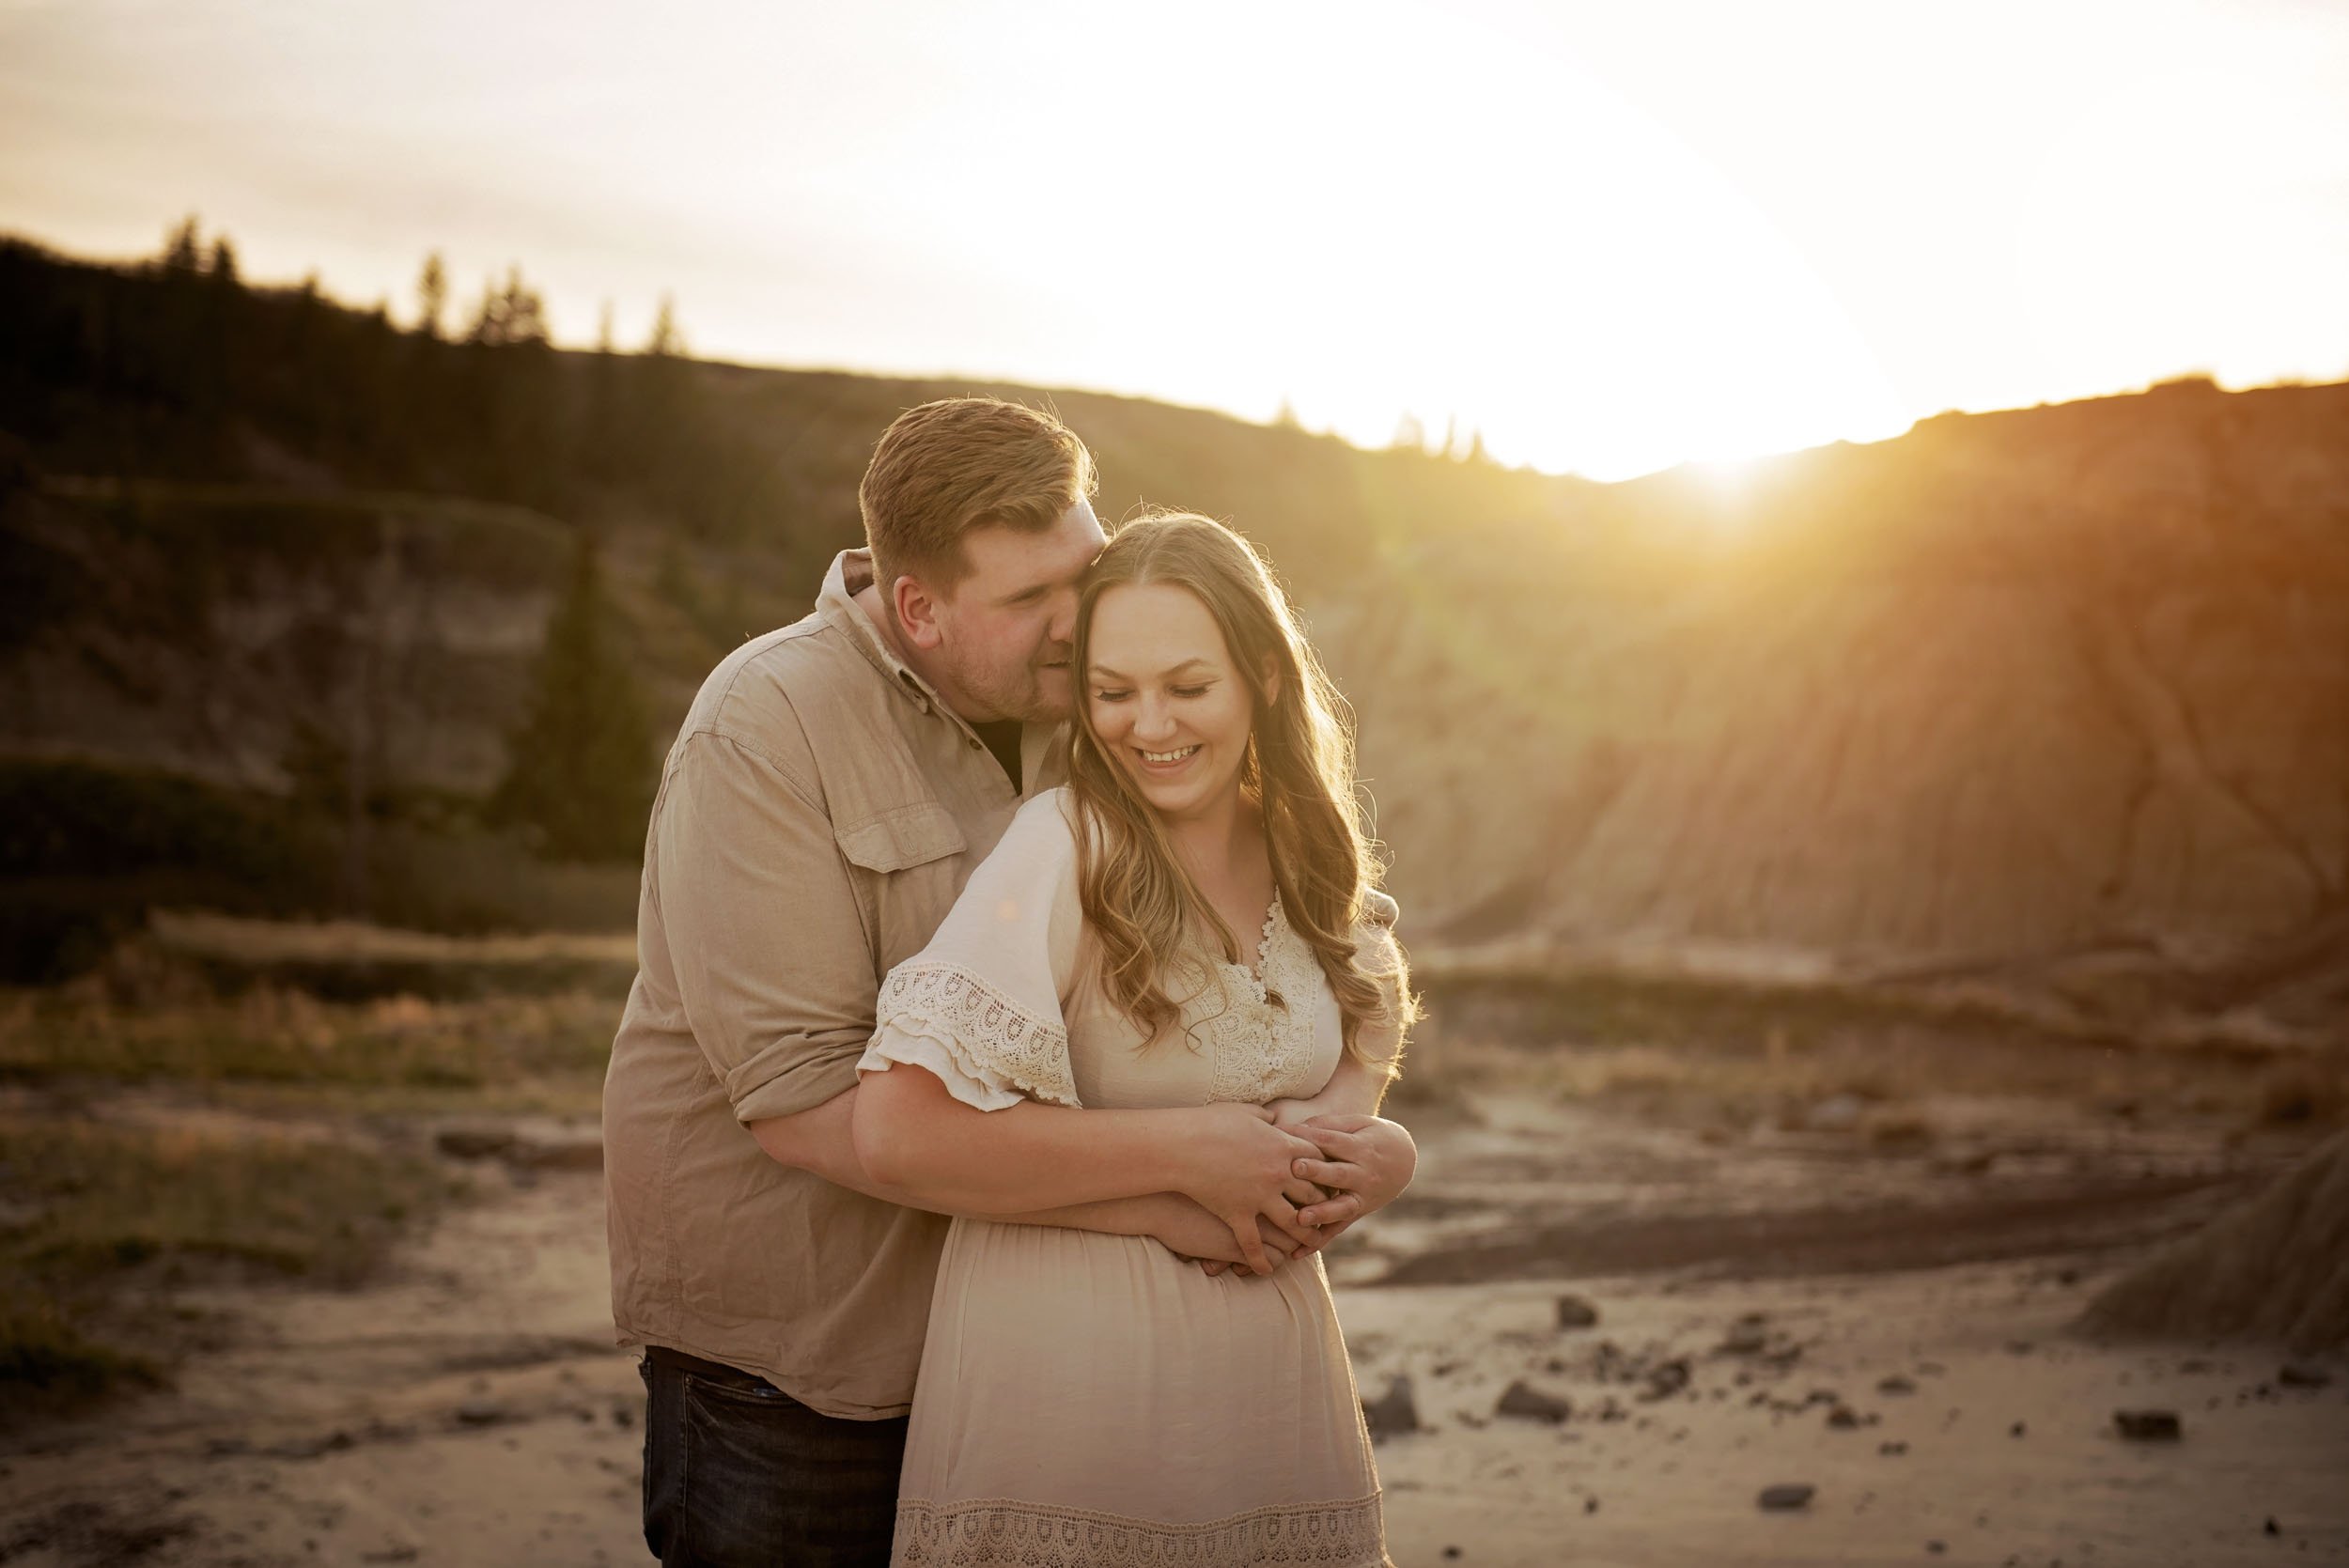 Lace and locket photo Airdrie Calgary Family Photographer-3.jpg